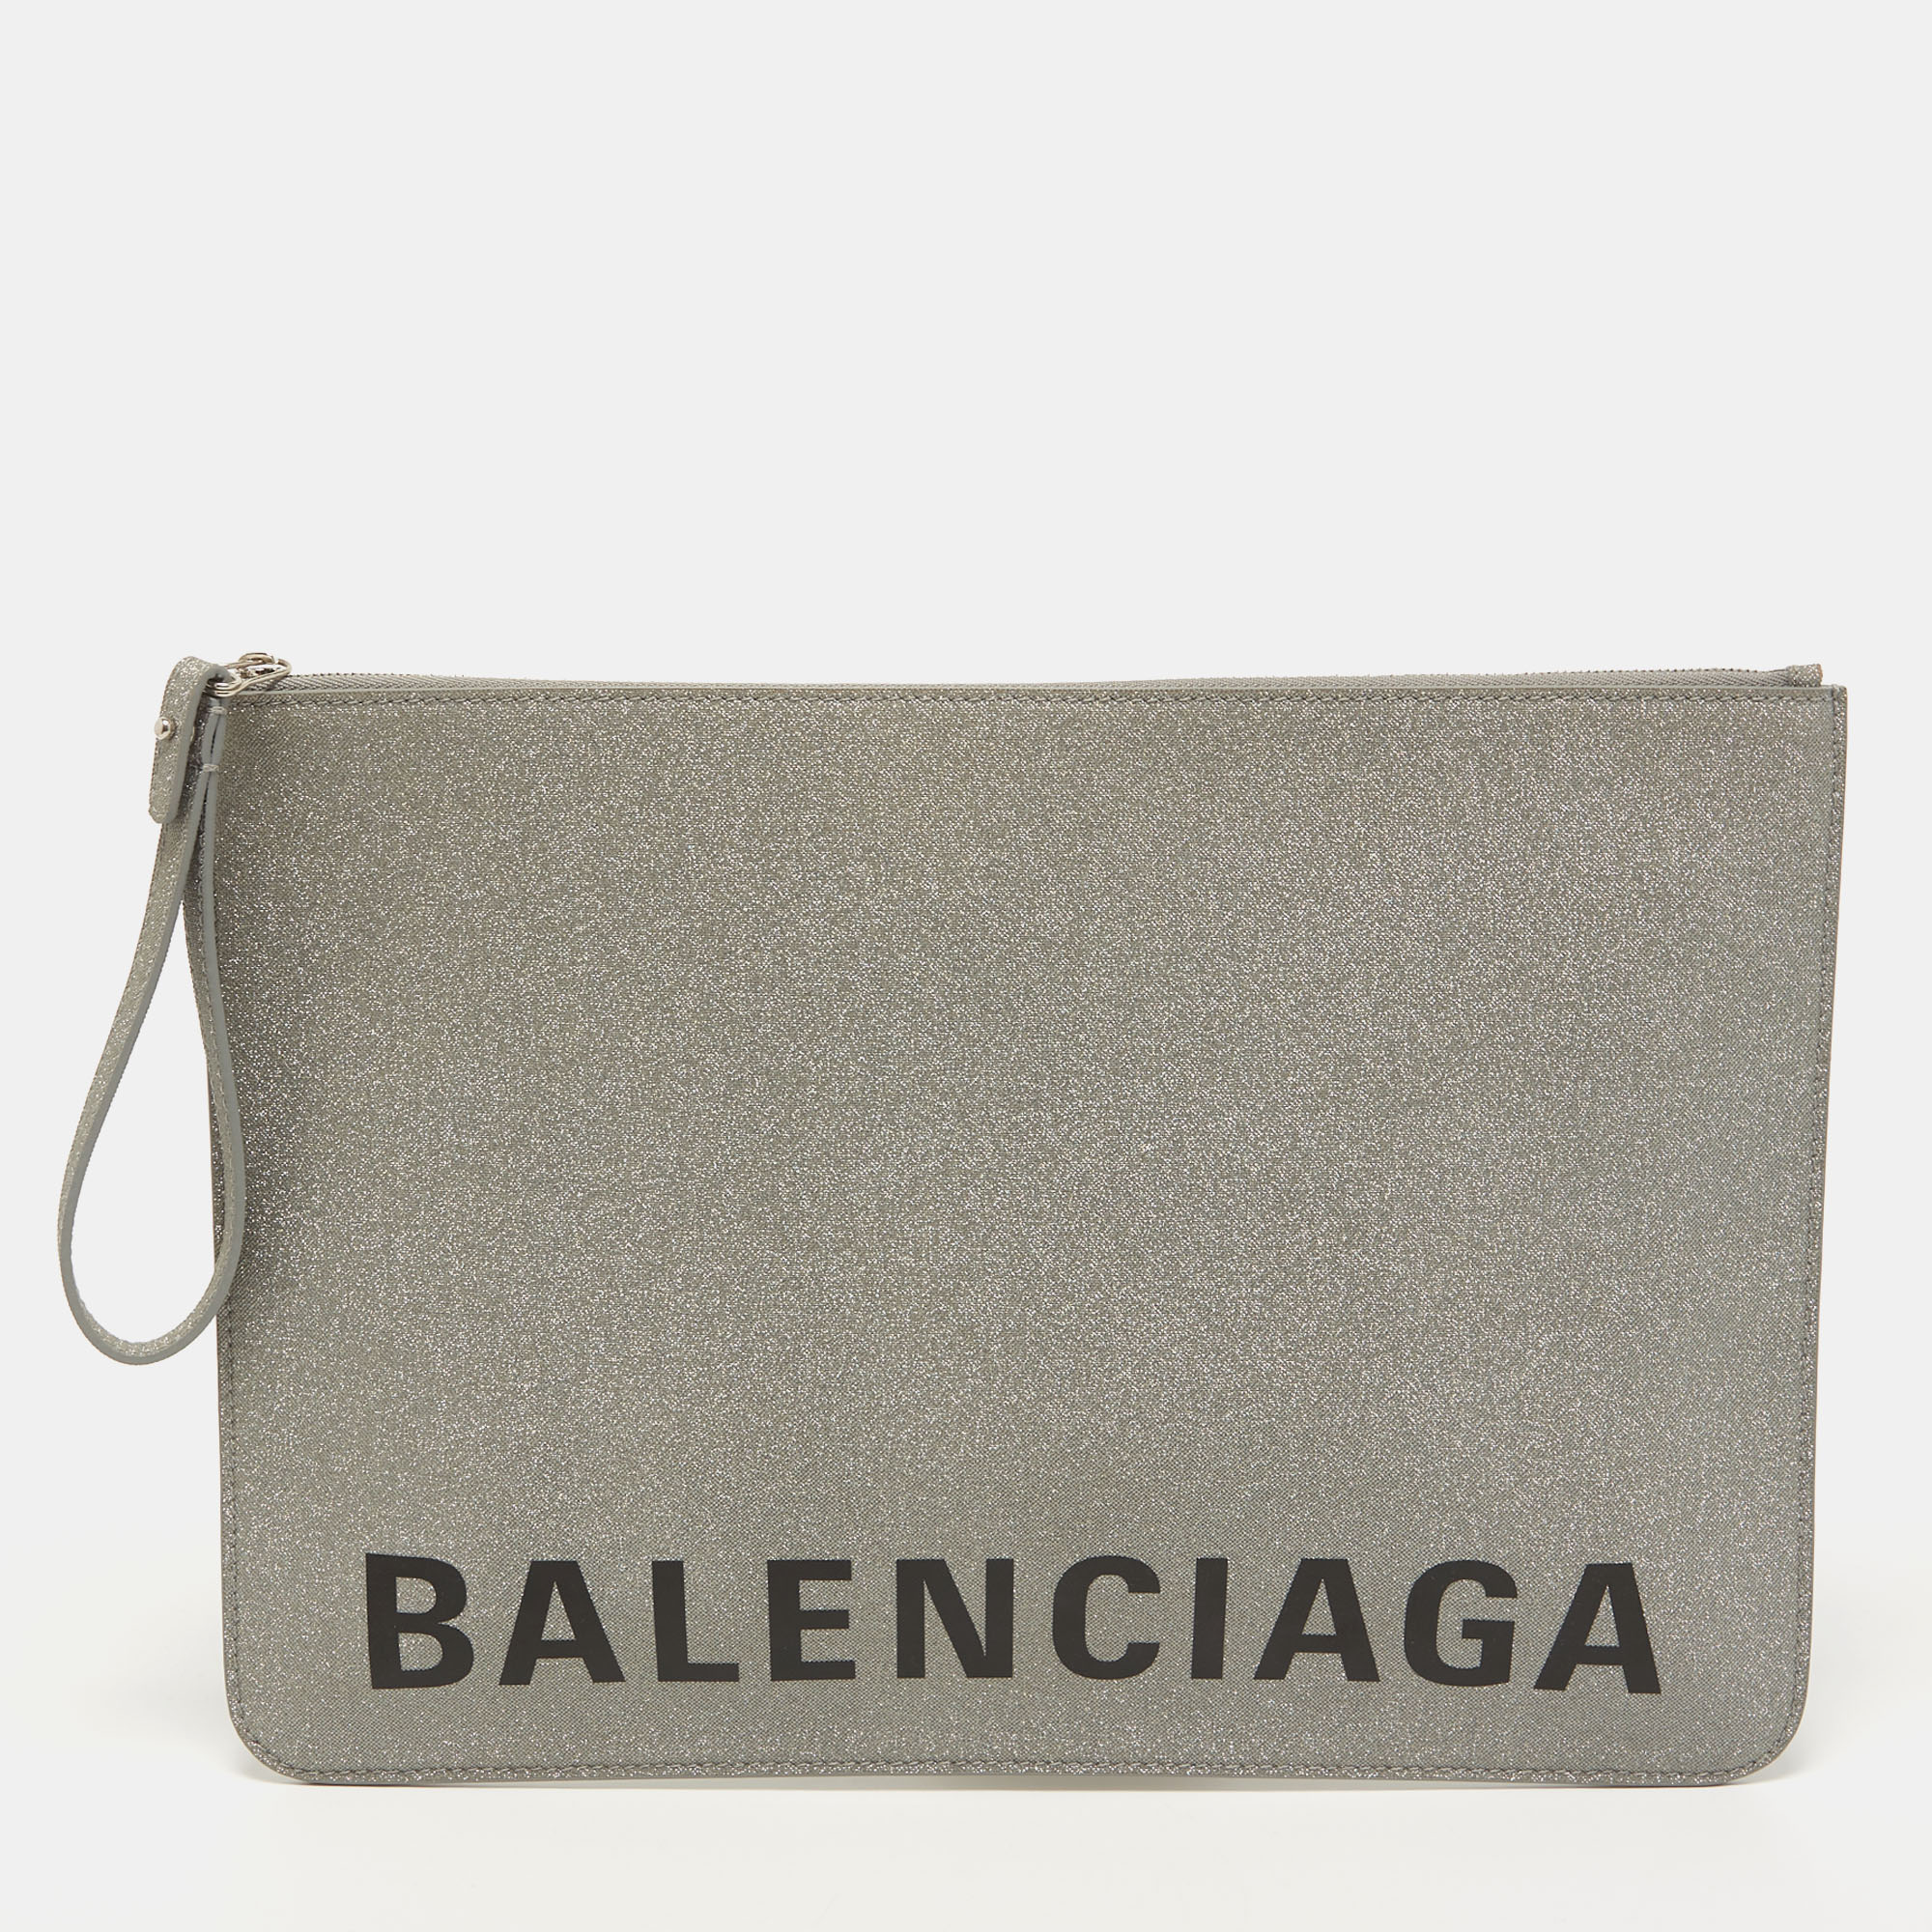 Pre-owned Balenciaga Grey Glitter Leather Ville Wristlet Pouch